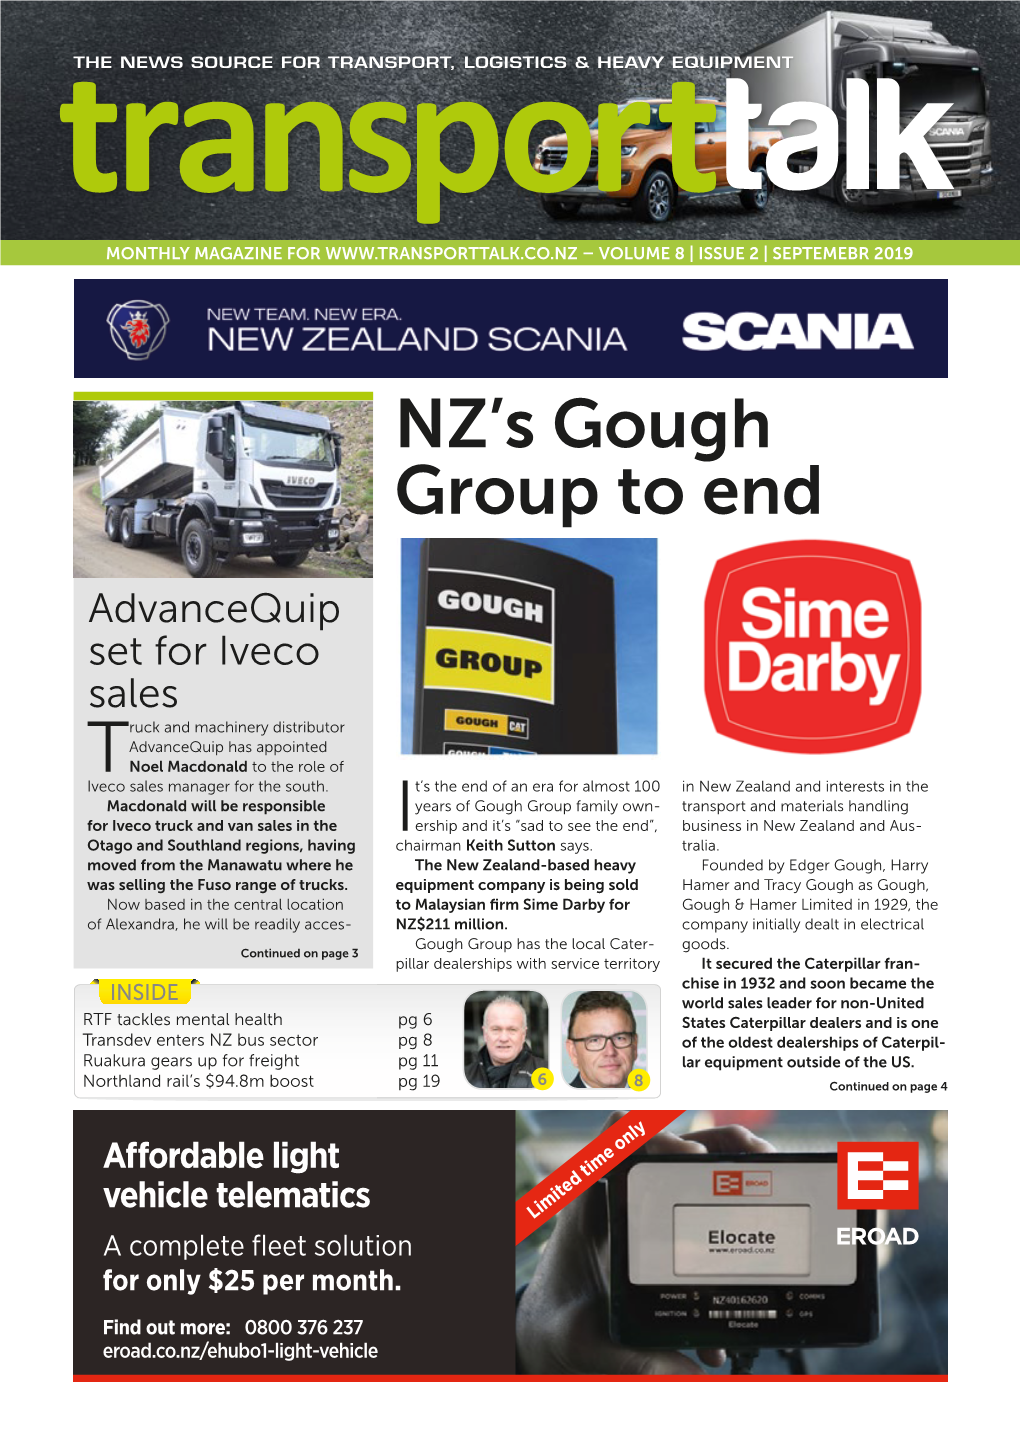 NZ's Gough Group To